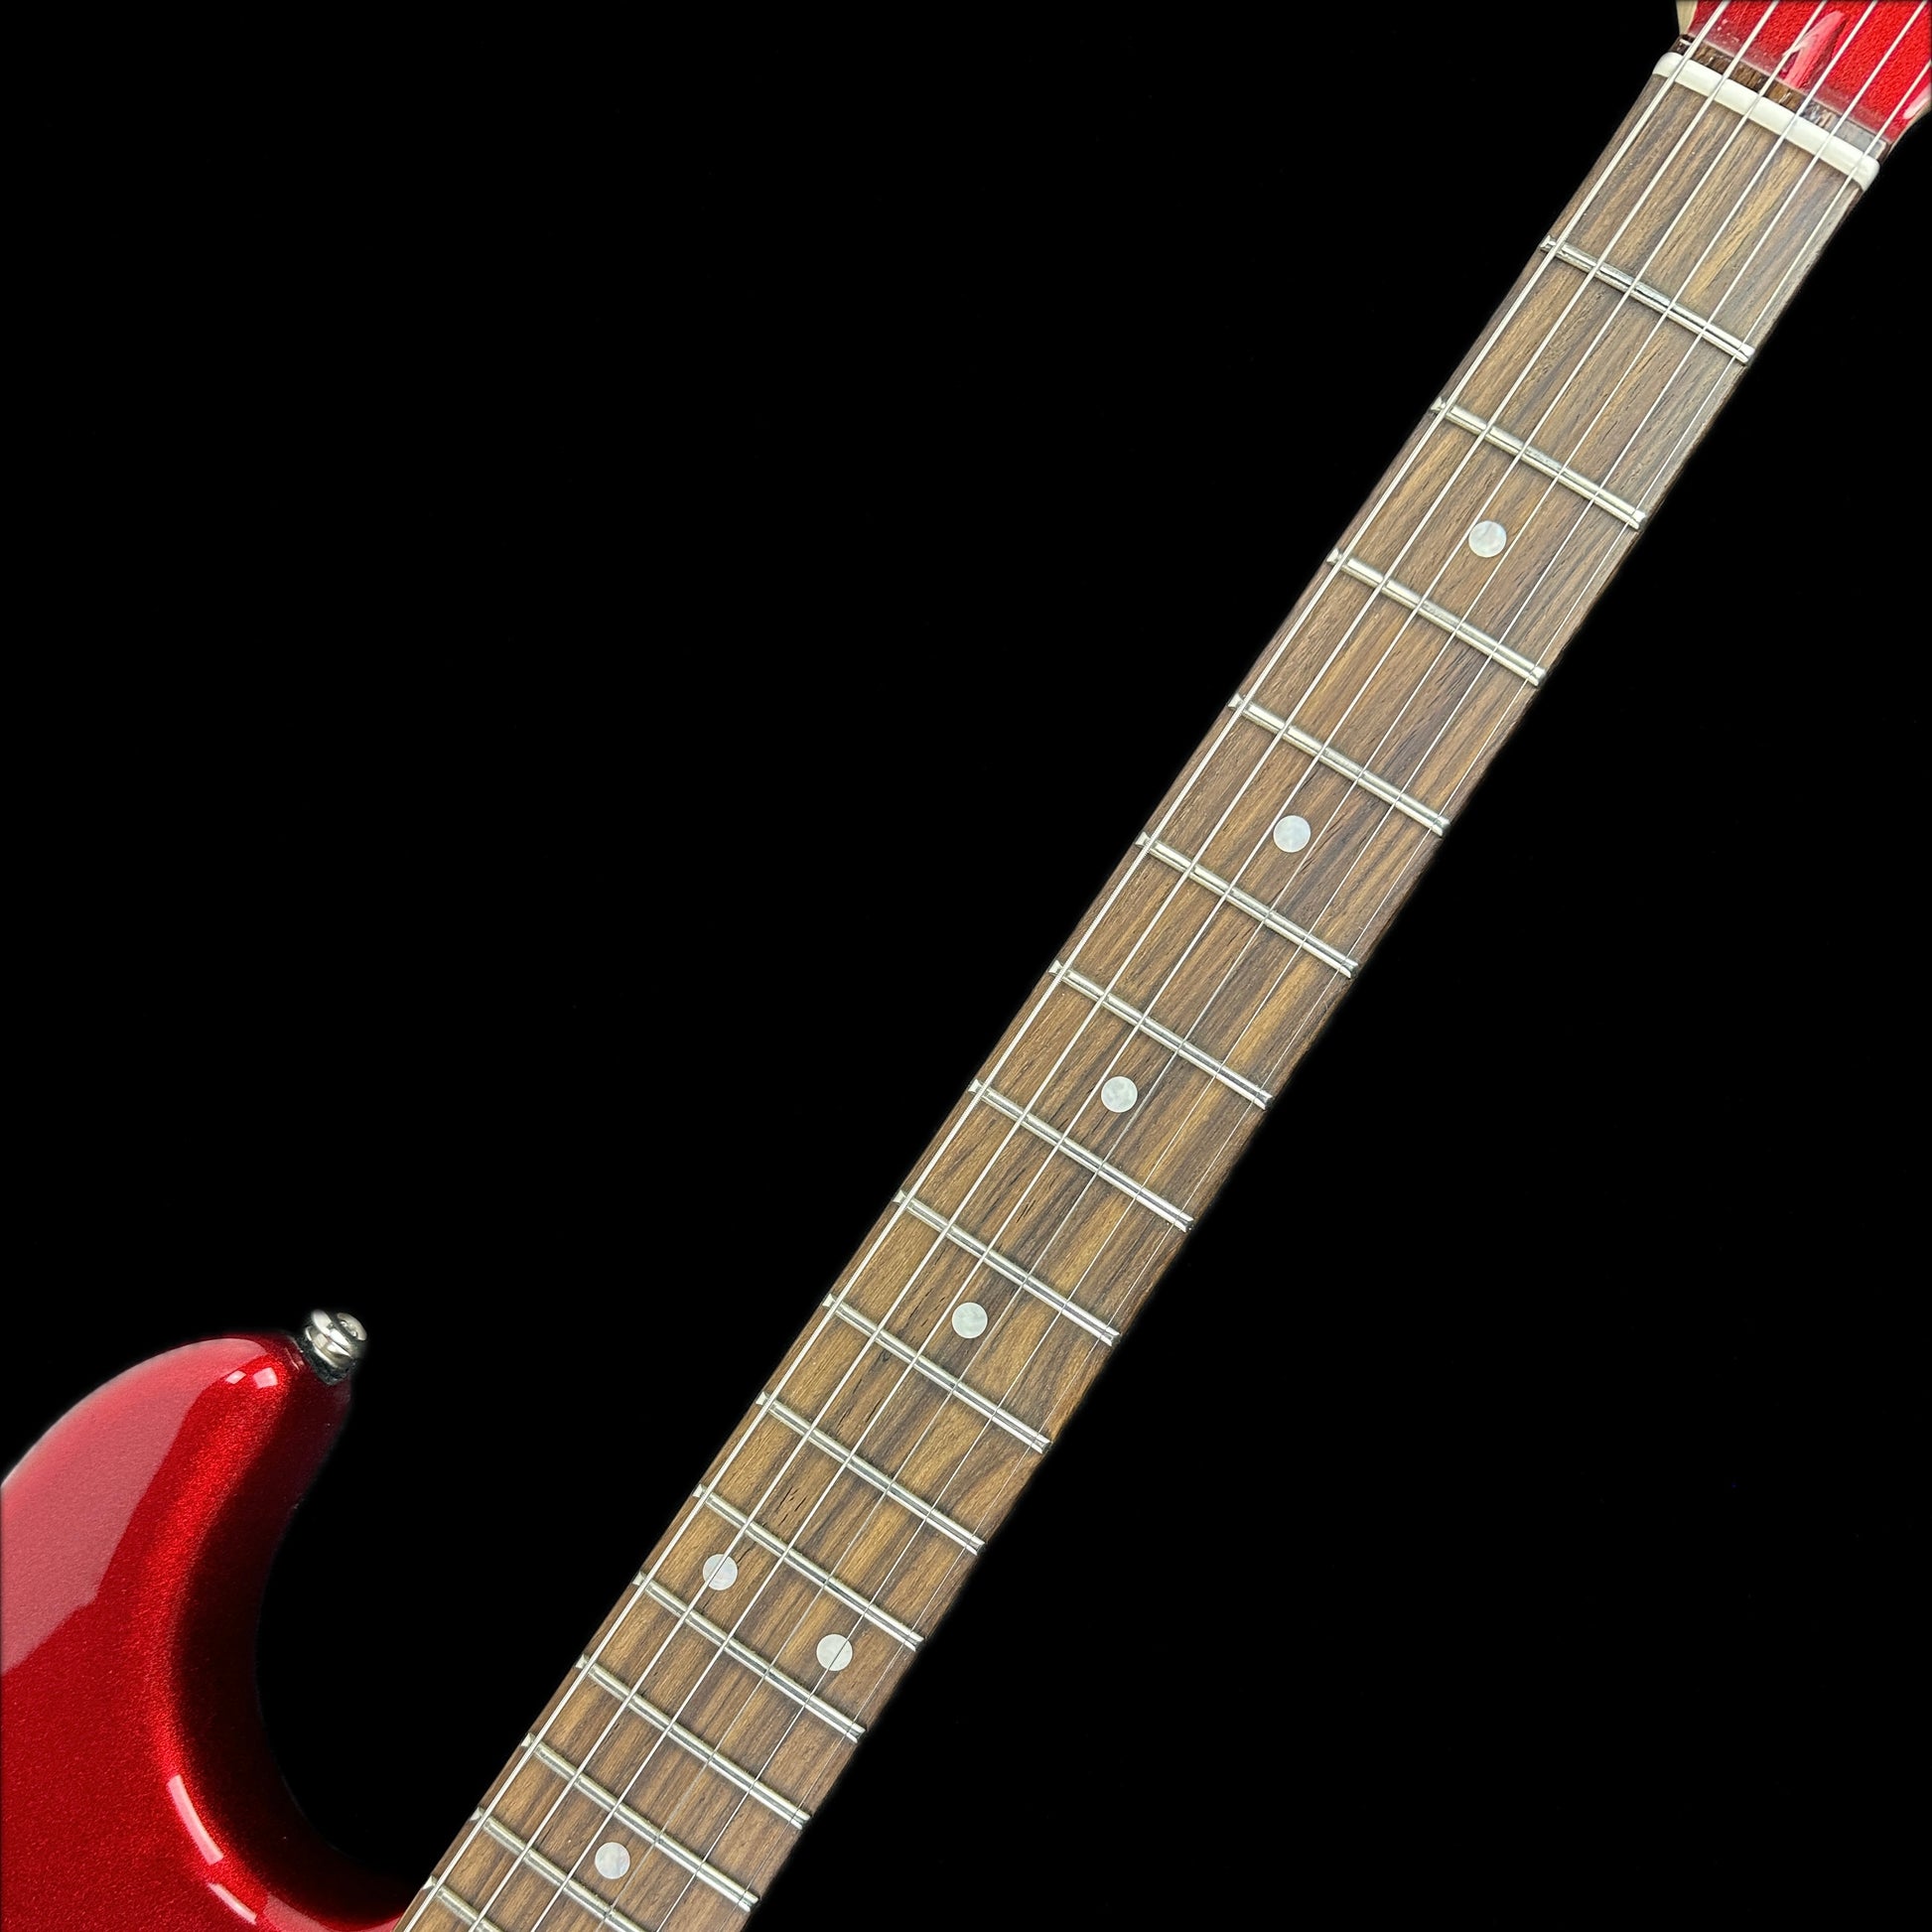 Fretboard of G&L USA Legacy HH RMC Empress Candy Apple Red Metallic Matching Headstock.